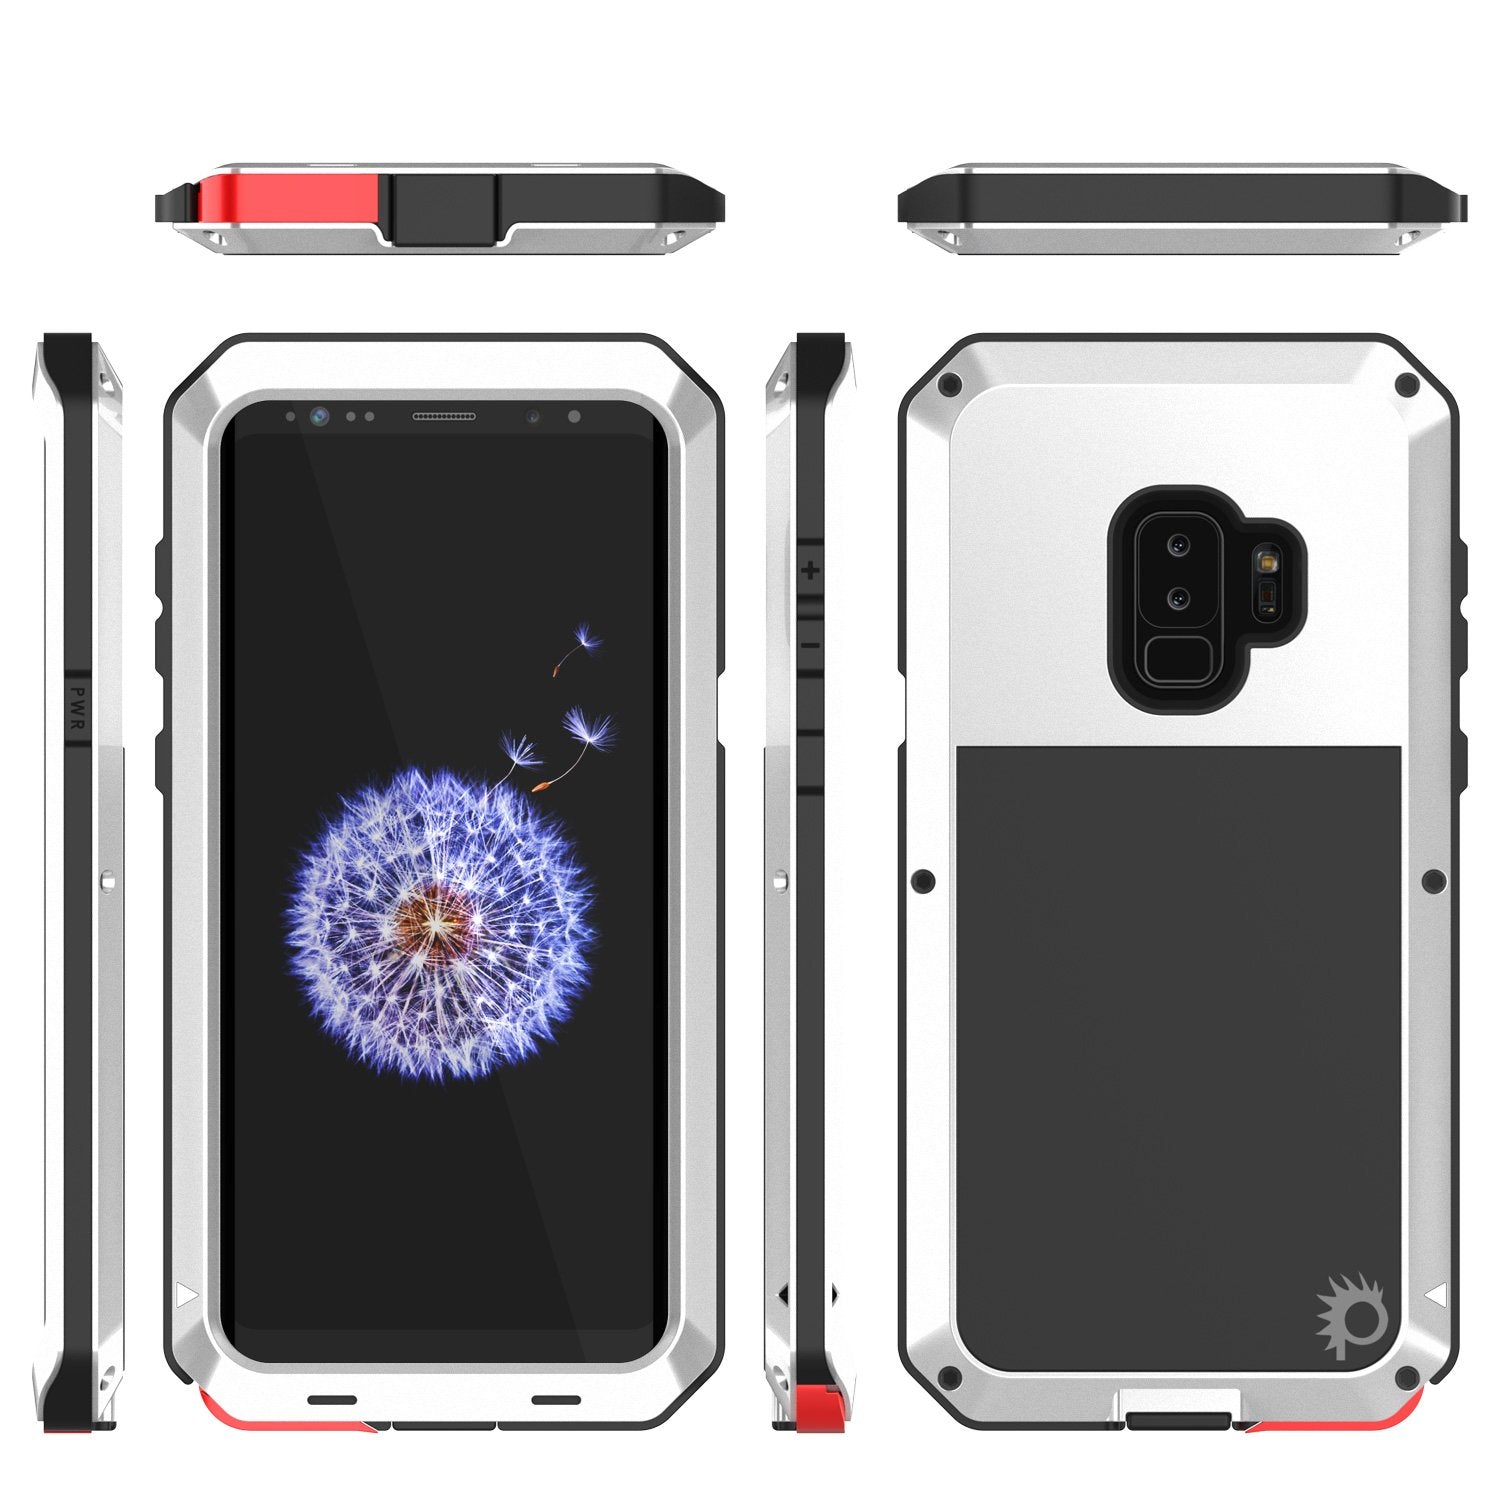 Galaxy S9 Plus Metal Case, Heavy Duty Military Grade Rugged Armor Cover [shock proof] Hybrid Full Body Hard Aluminum & TPU Design [non slip] W/ Prime Drop Protection for Samsung Galaxy S9 Plus [White]